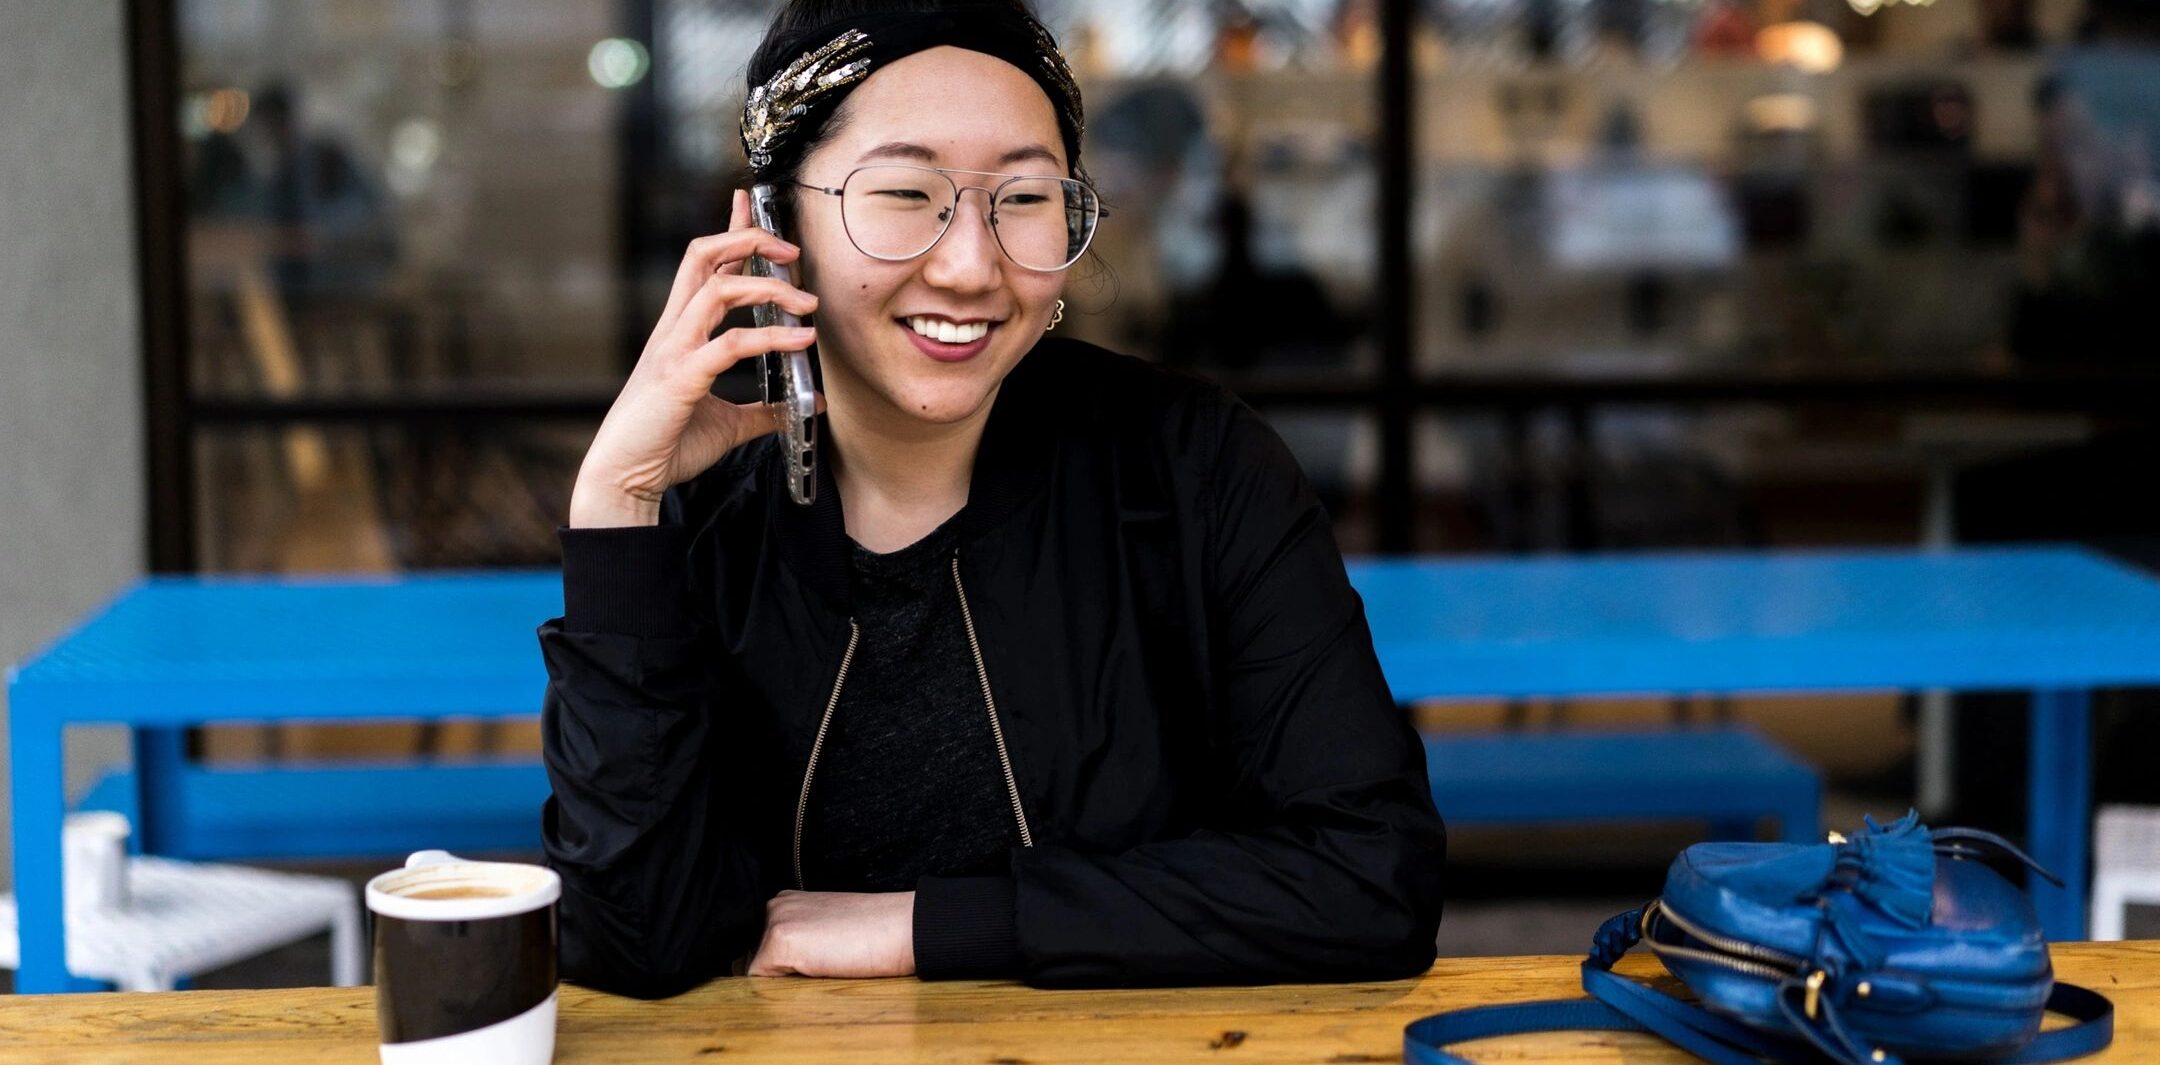 Smiling woman talking on the phone and drinking coffee at a restaurant